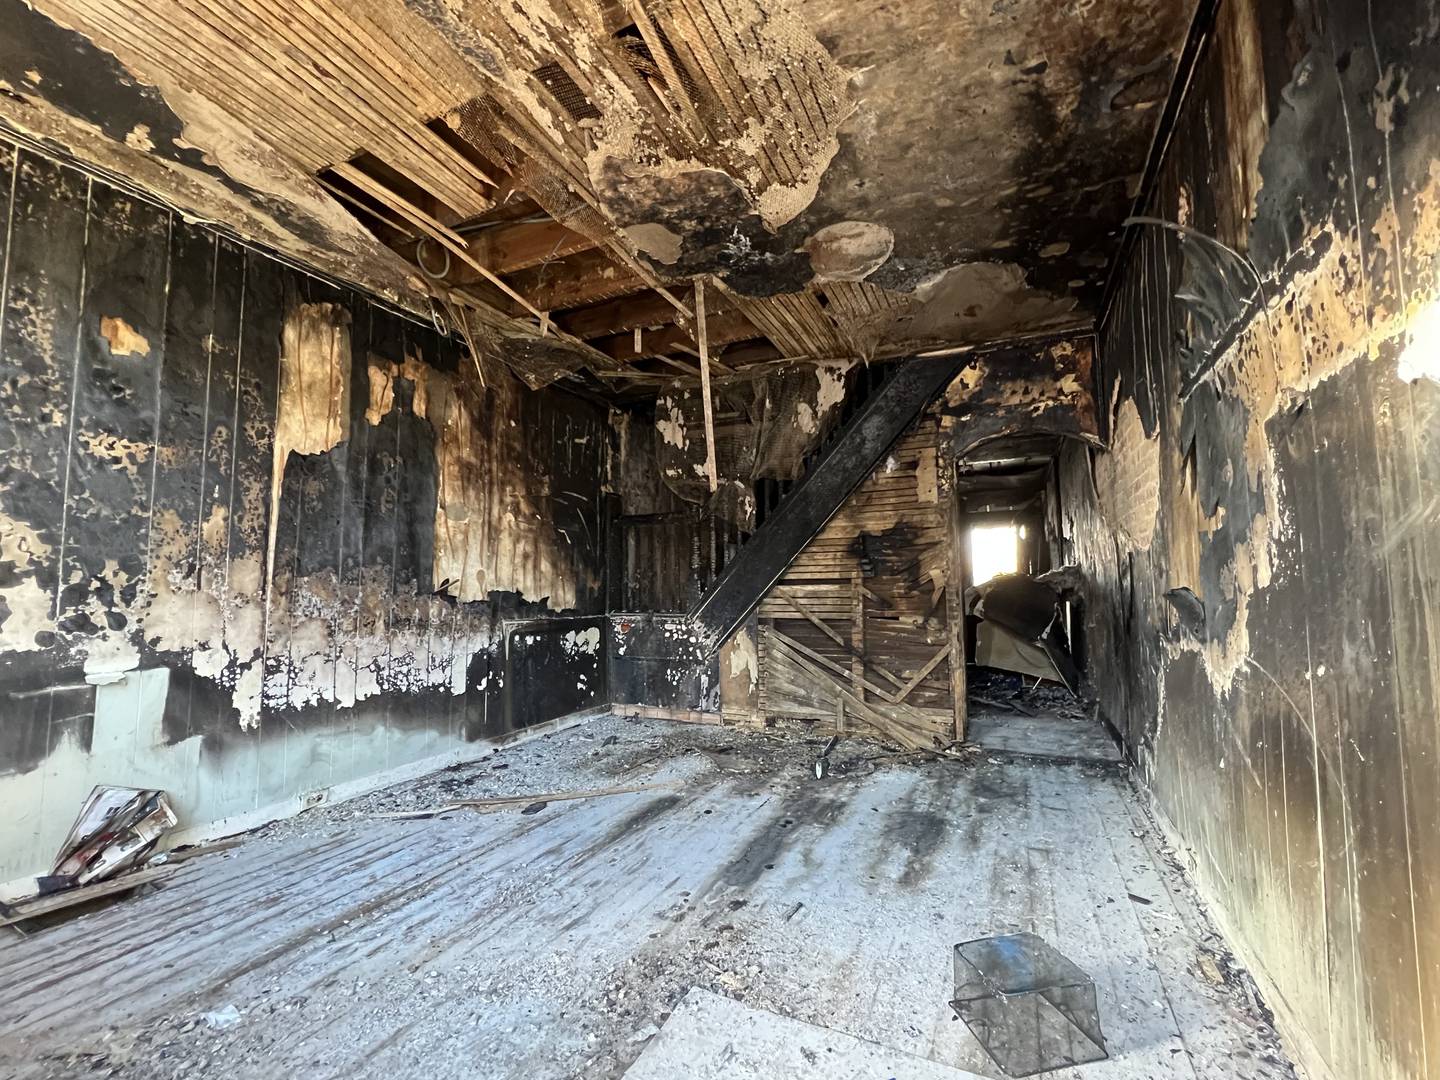 The inside of a home where a Jan. 25 fire critically injured a 58-year-old man, also hurt a woman, and killed 11 dogs. The home was owned by an ABC Capital investor who is among the scores who say they were ripped off, and highlights another wrinkle of the company's business, a loan company called Wall Street Wealth Management.